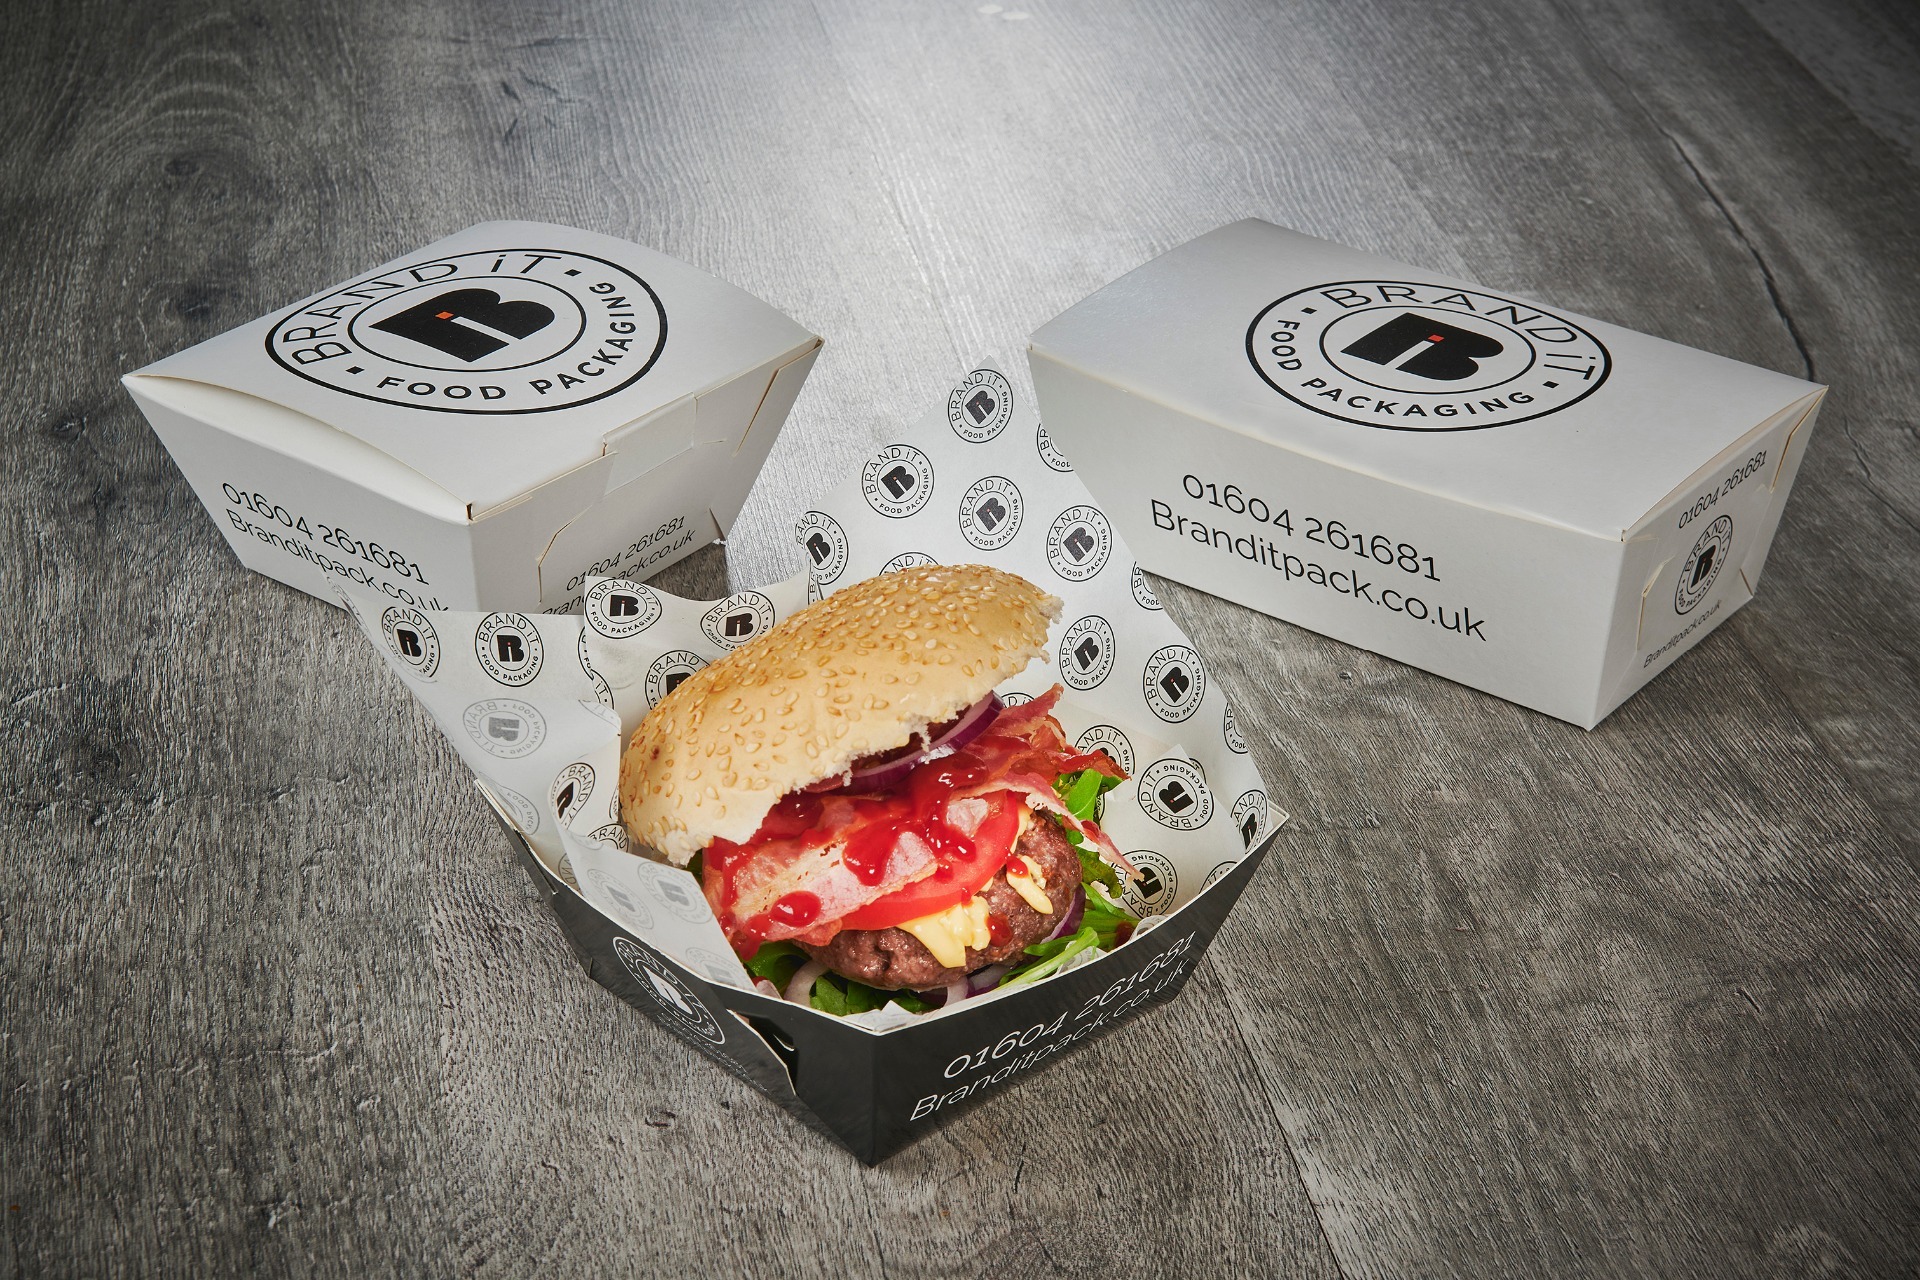 Flat pack, branded burger boxes and trays